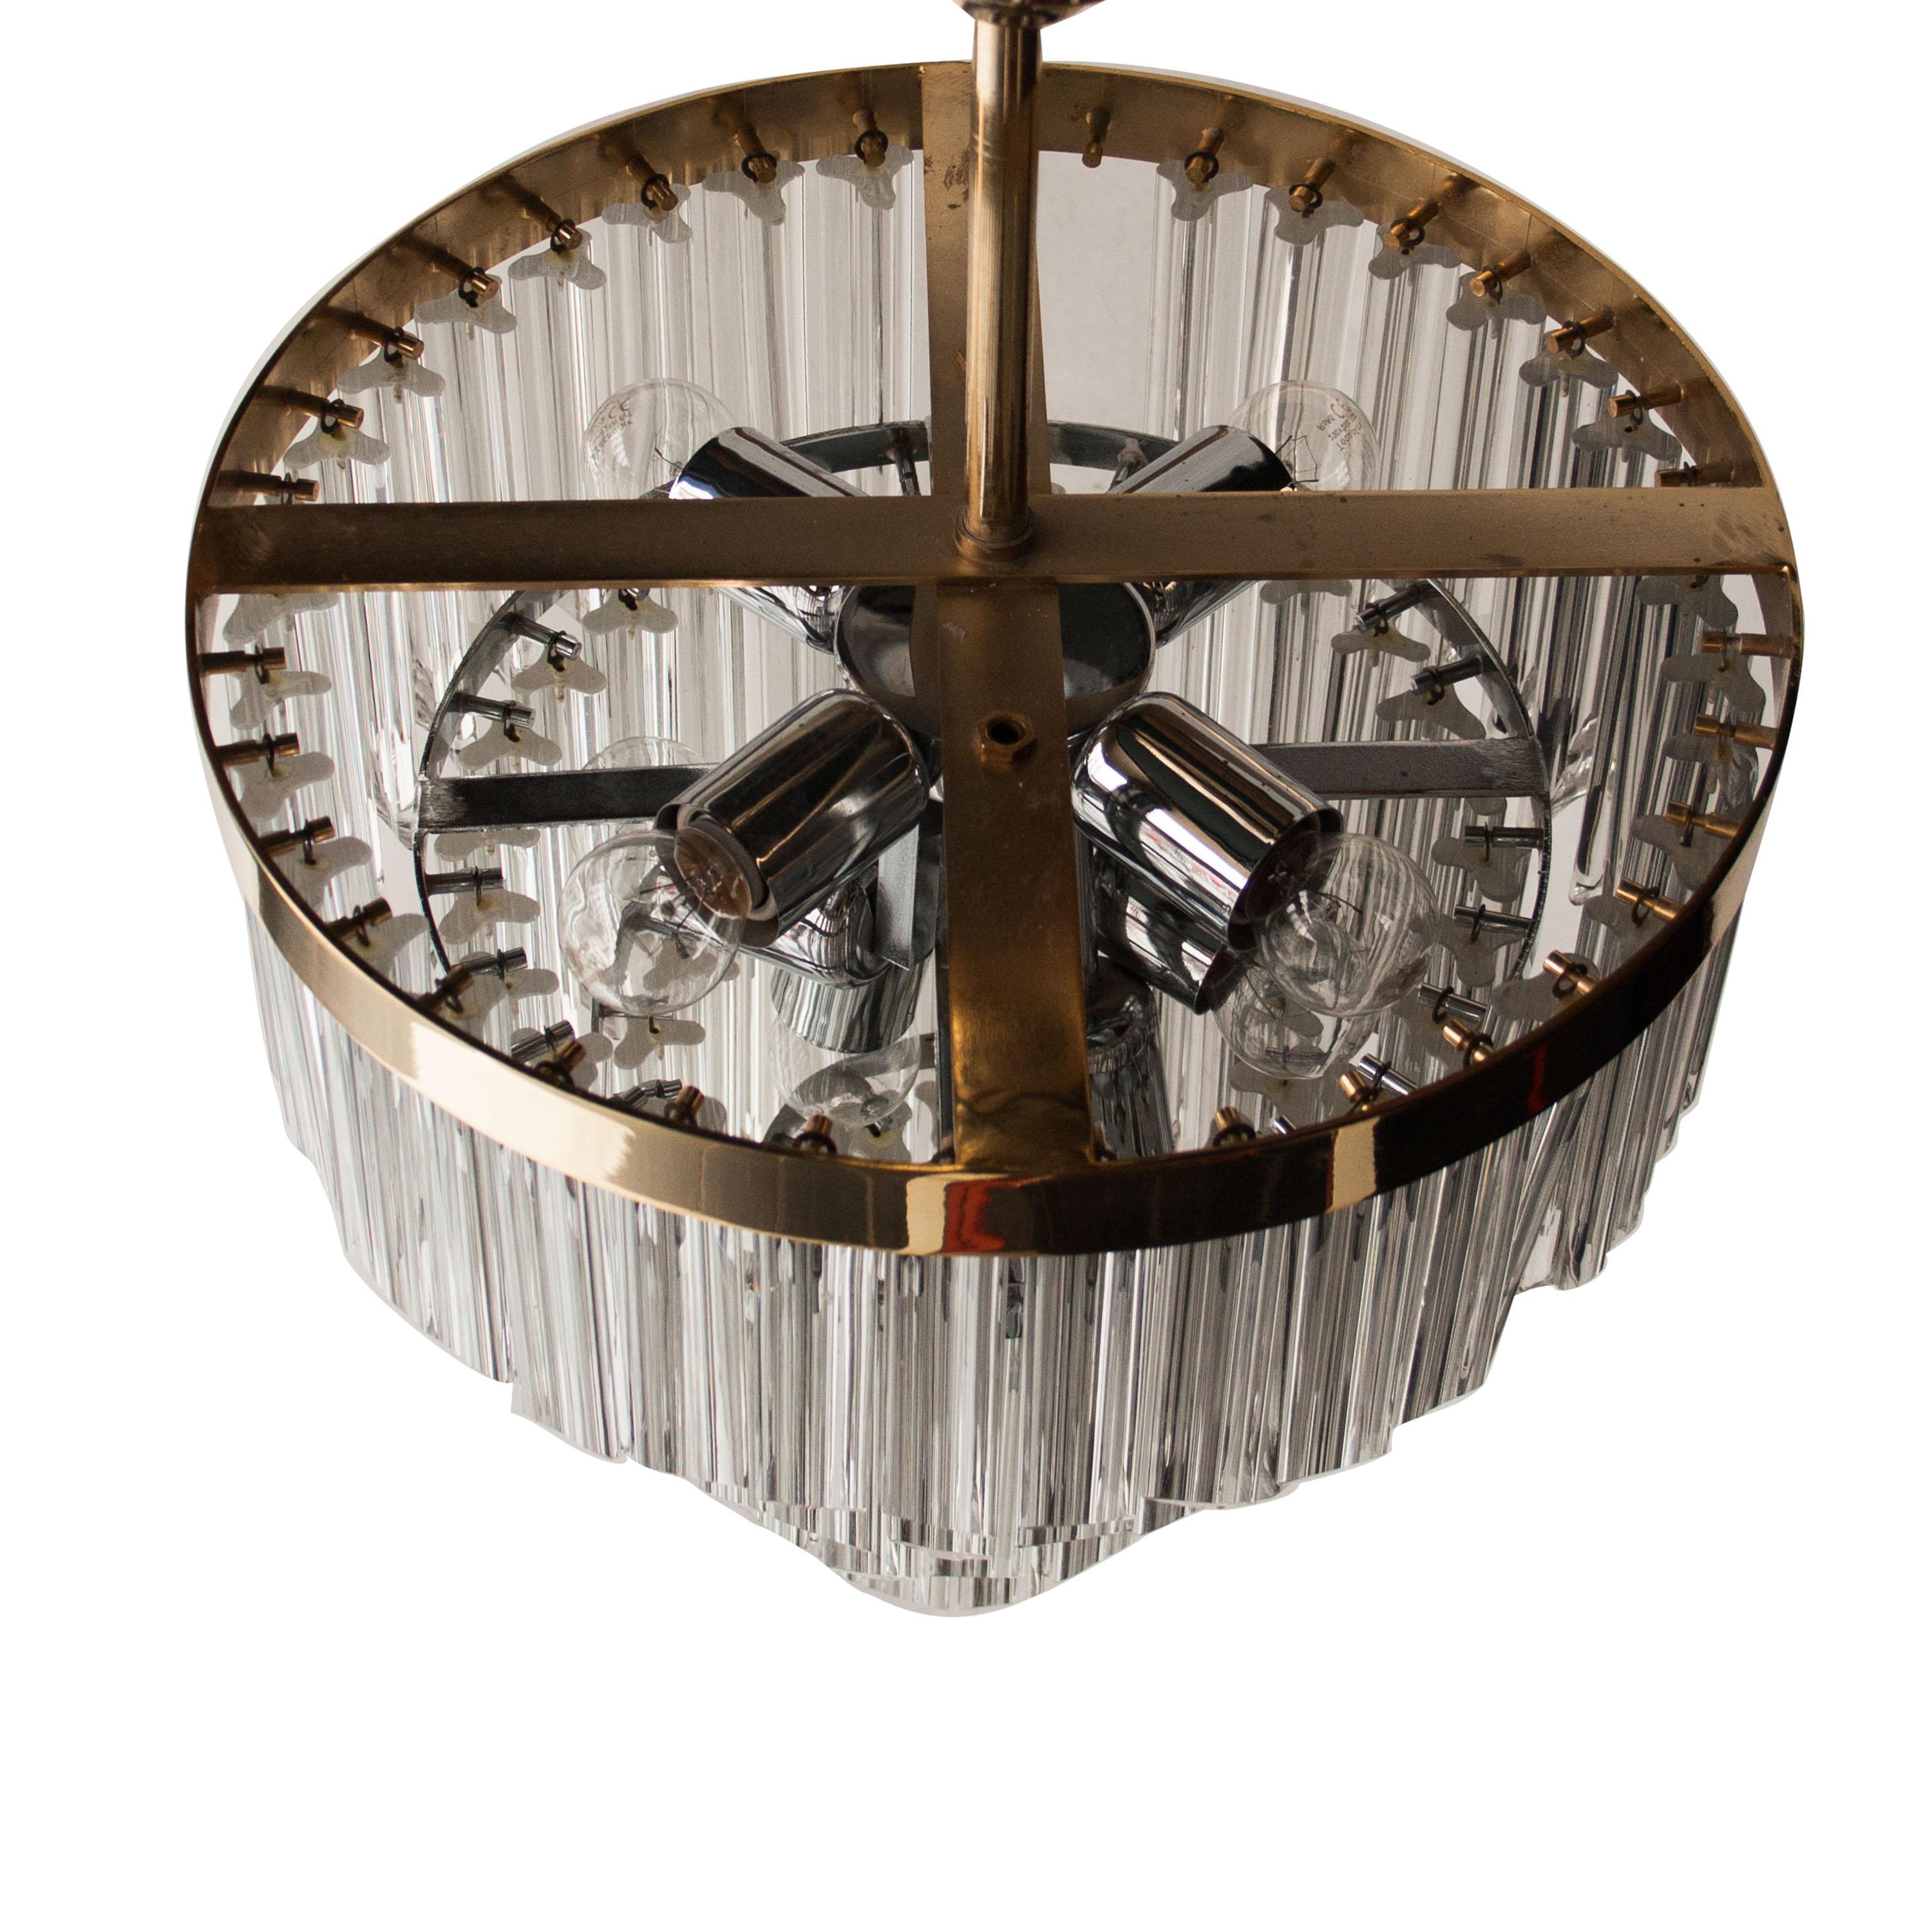 Italian Mid-Century Modern Glass and Brass Chandelier Lamp, Italy, 1970 For Sale